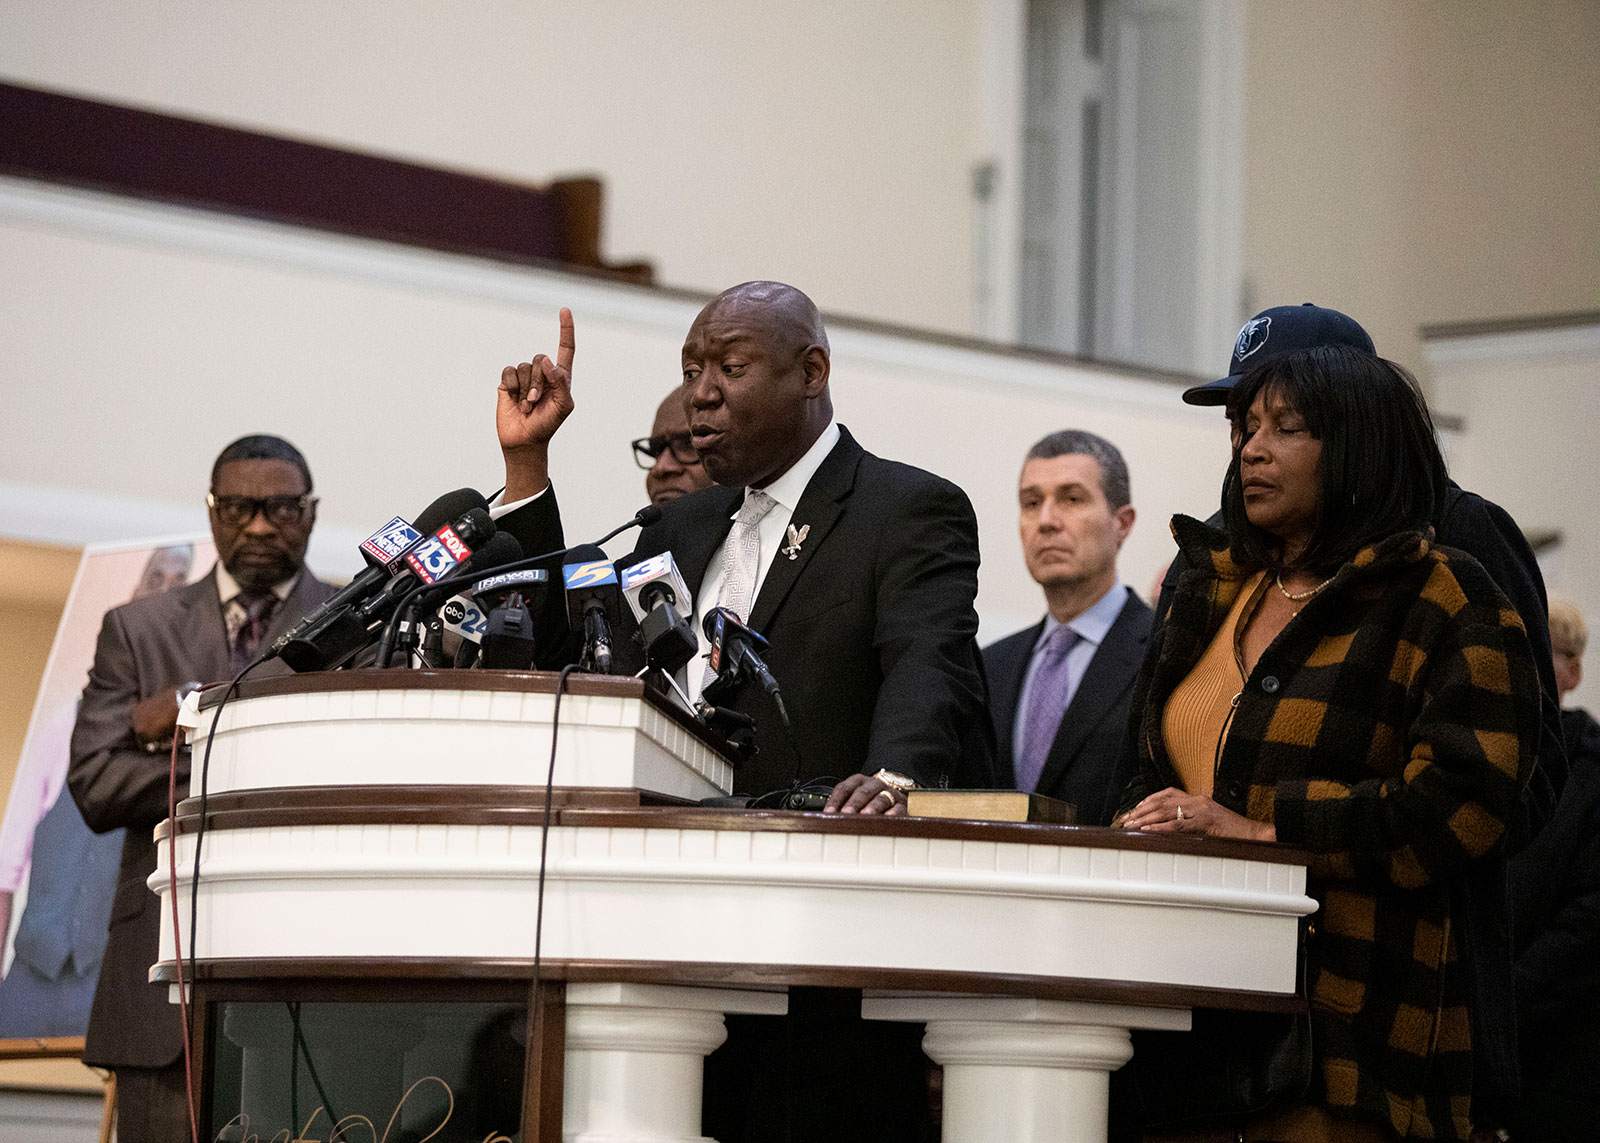 Attorney Benjamin Crump speaks at Mount Olive Baptist Church in Memphis on Friday.